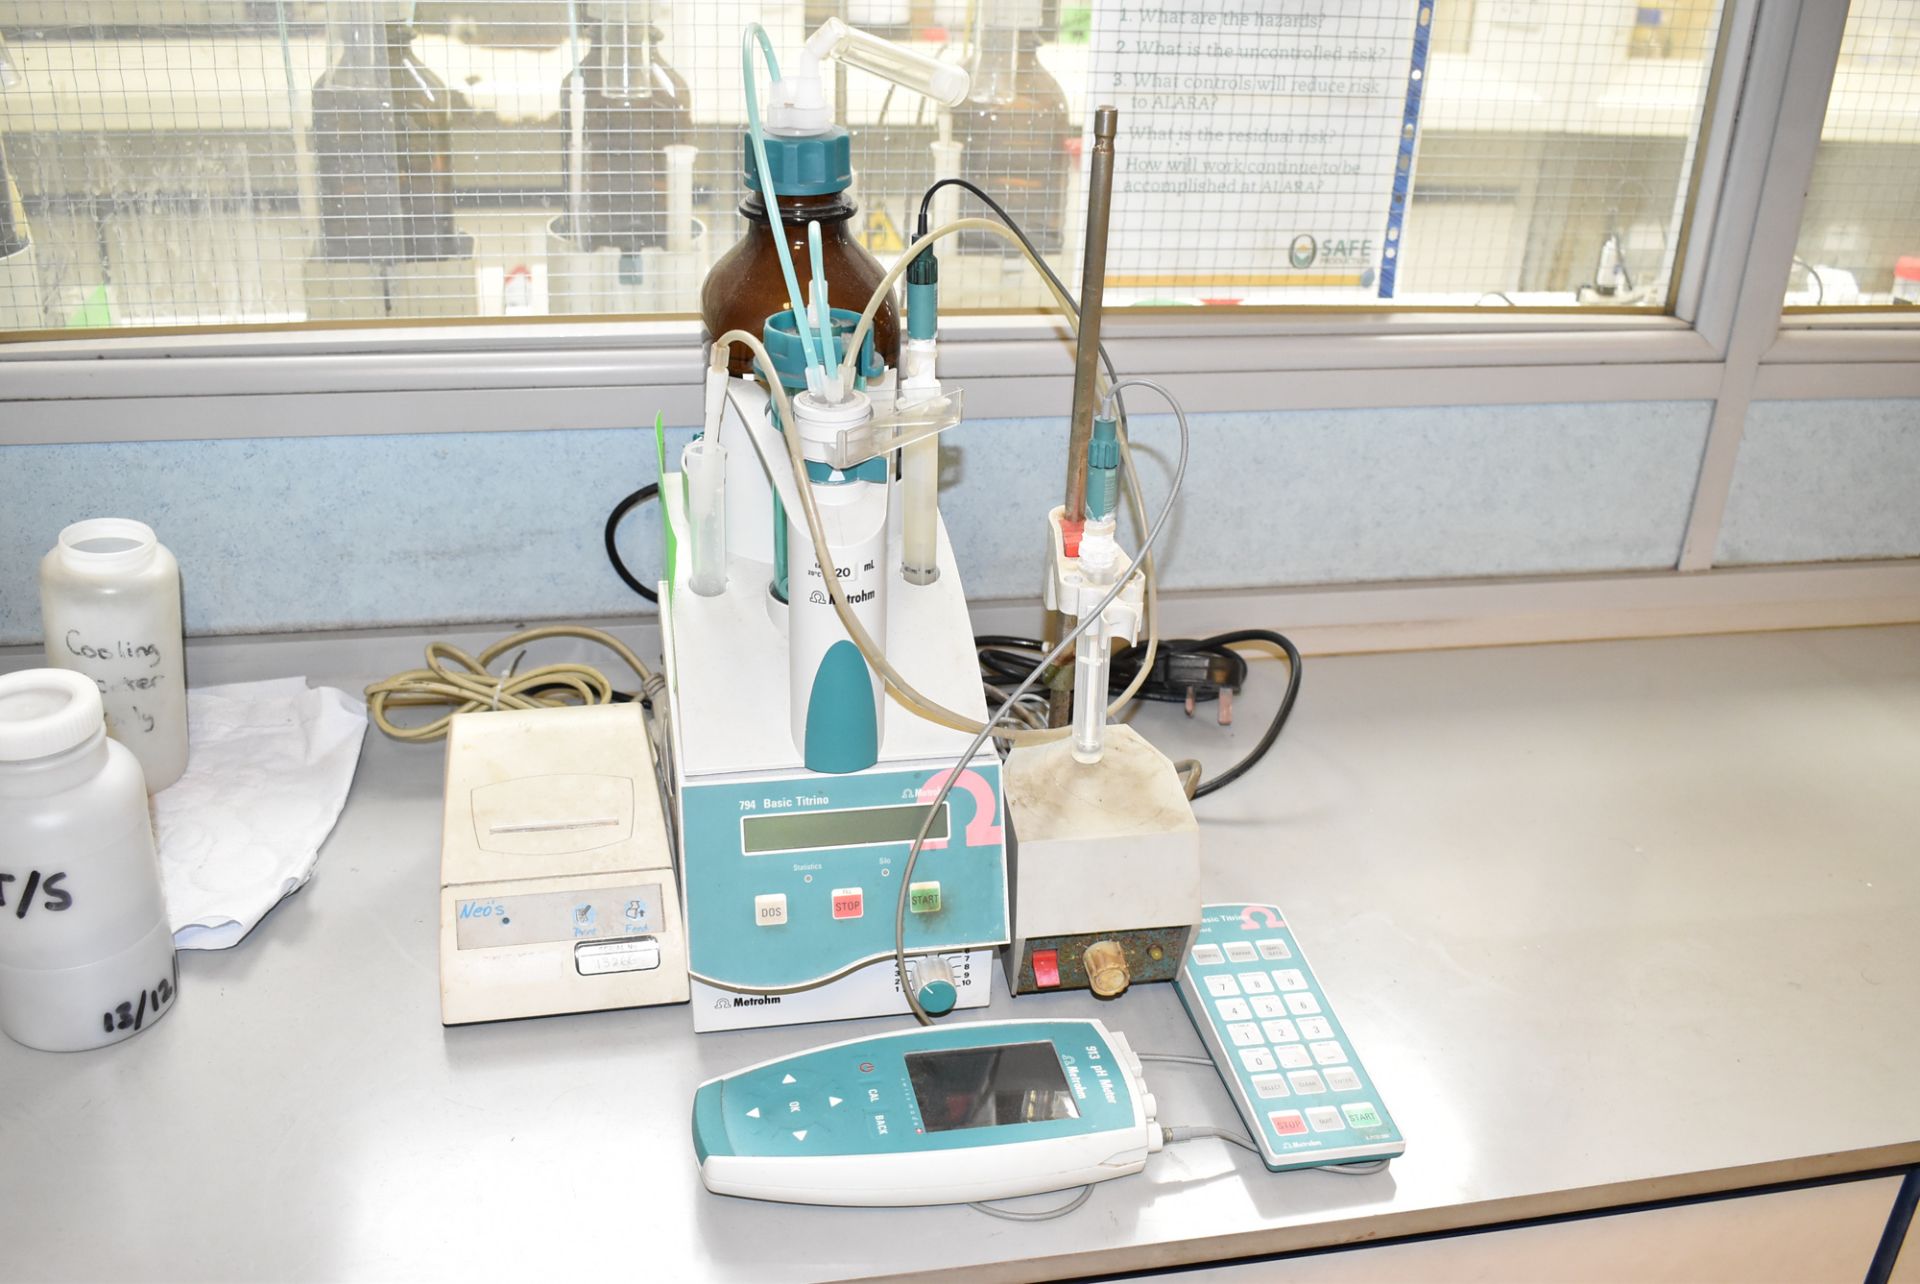 METROHM DIGITAL TITRATOR SYSTEM CONSISTING OF METROHM 794 BASIC TITRINO DIGITAL TITRATOR WITH - Image 2 of 3